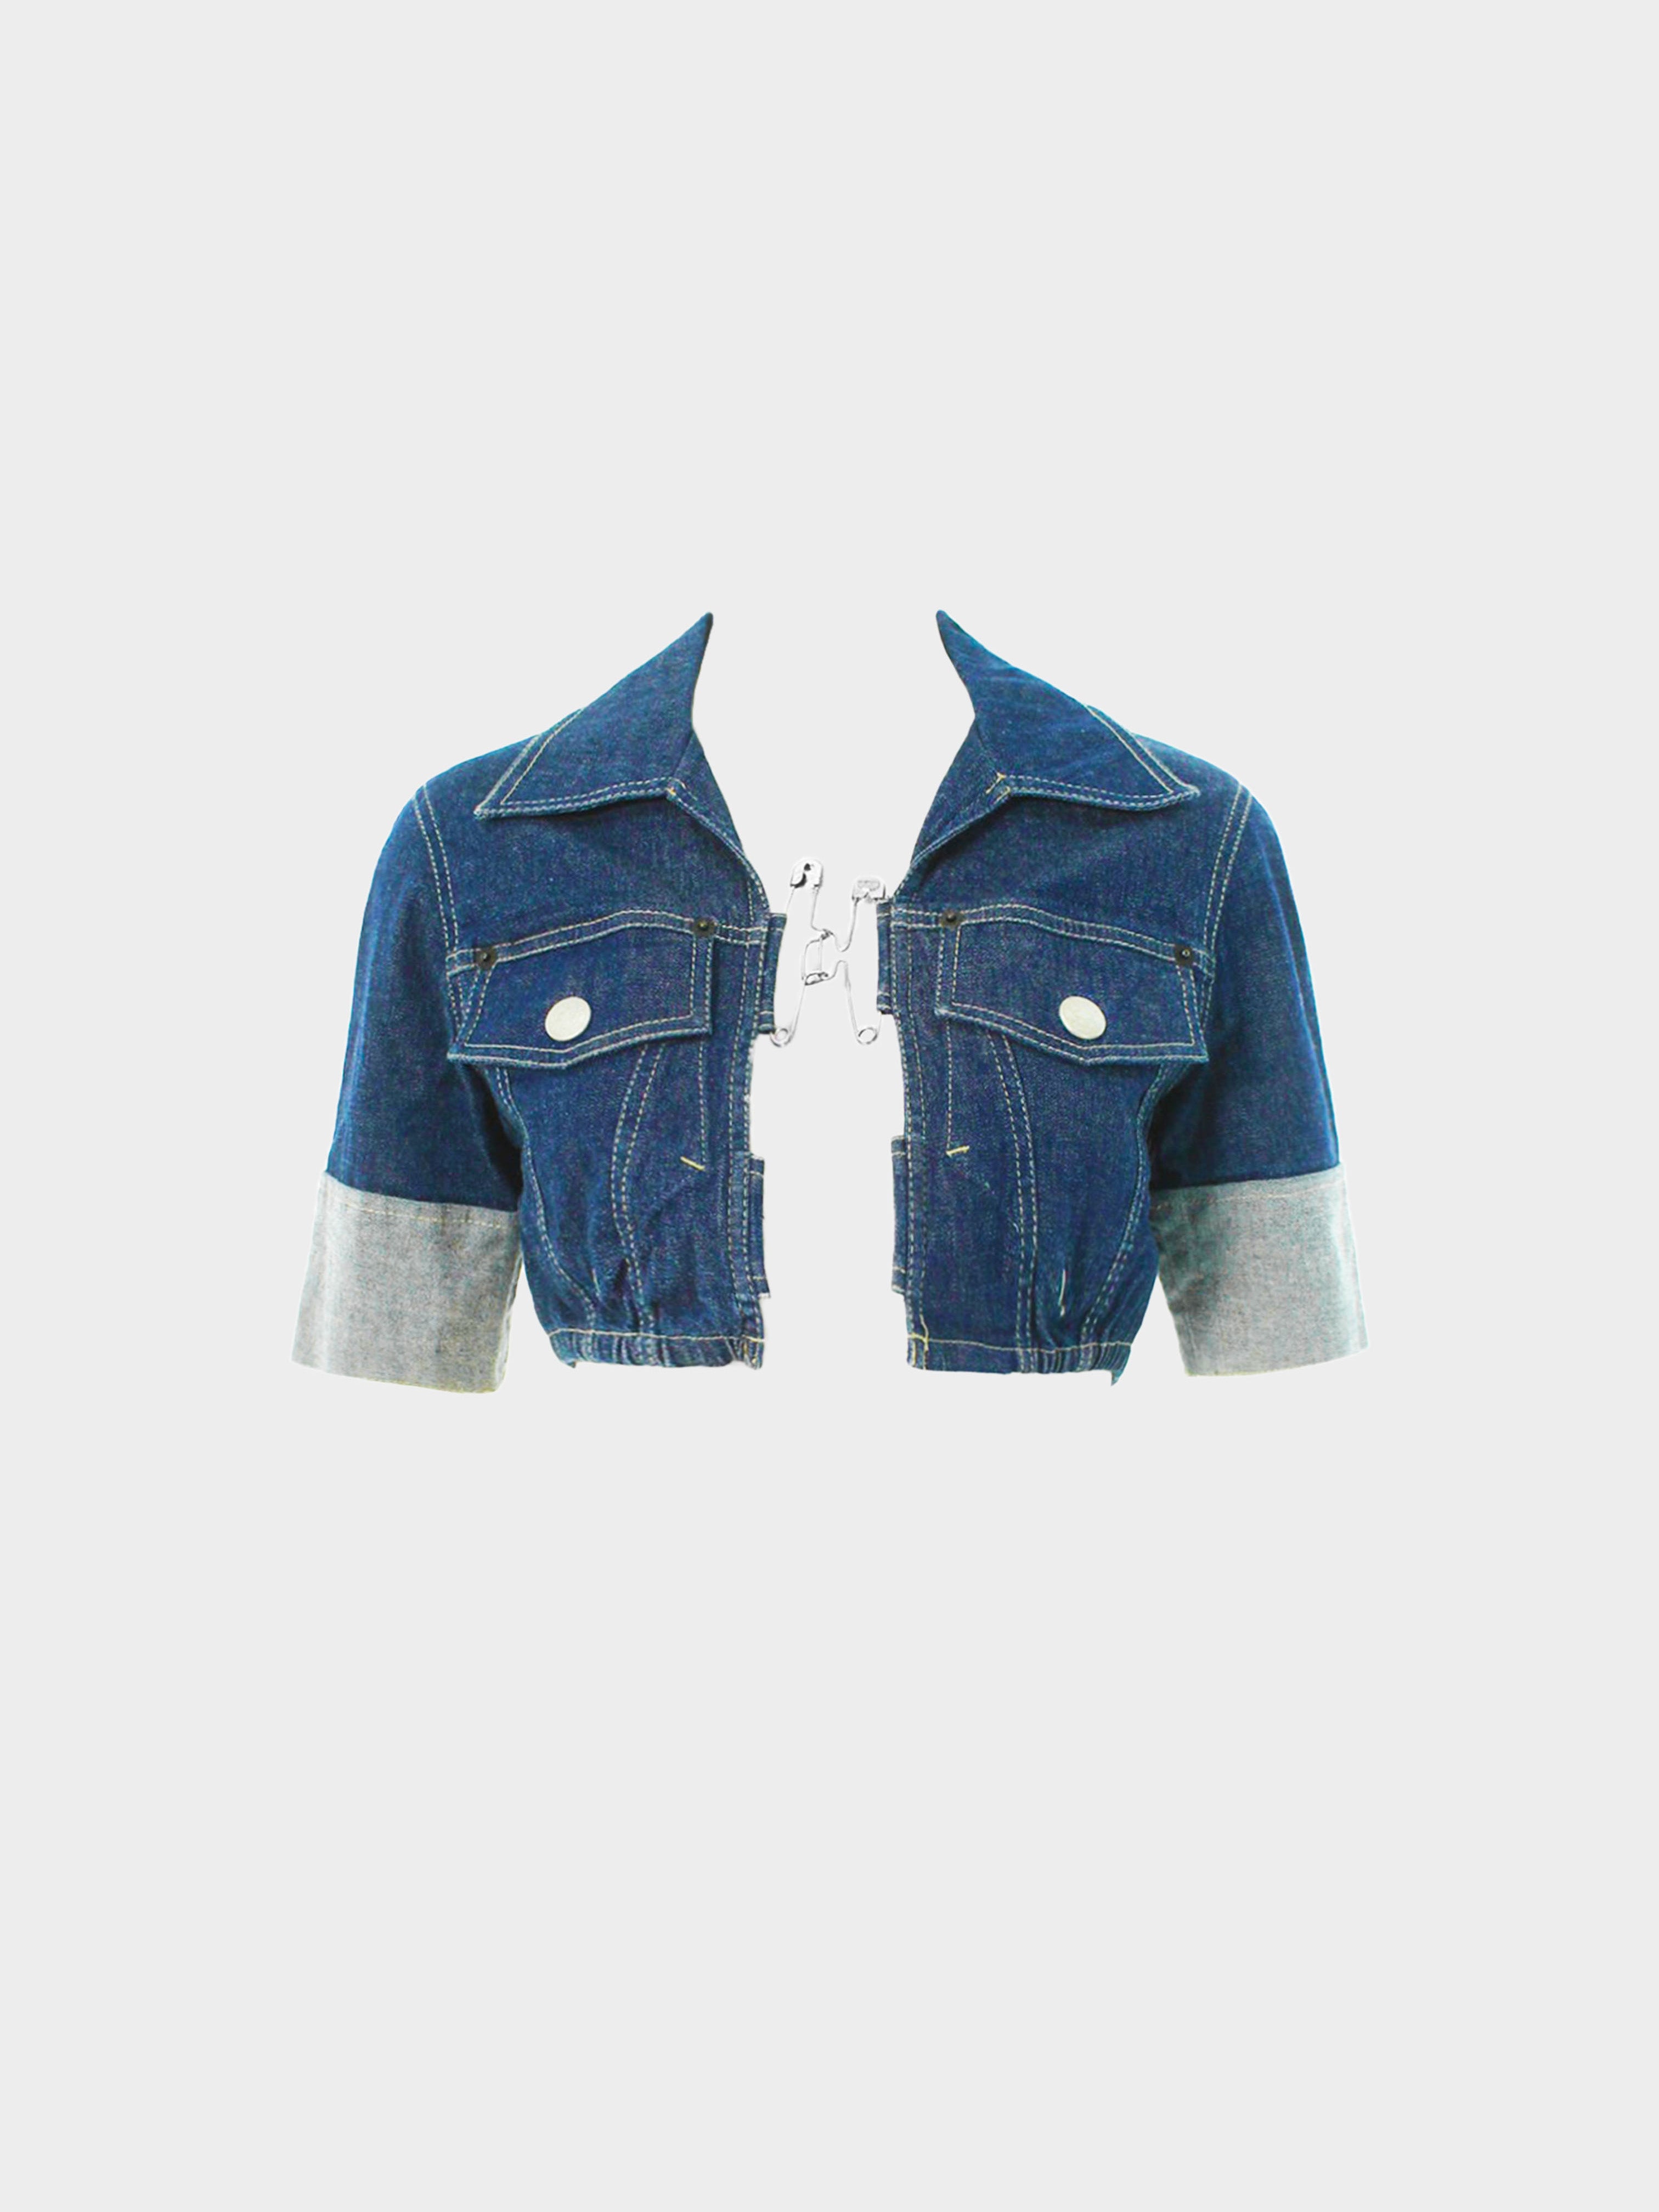 Jean Paul Gaultier 1990s Safety Pin Denim Cropped Jacket